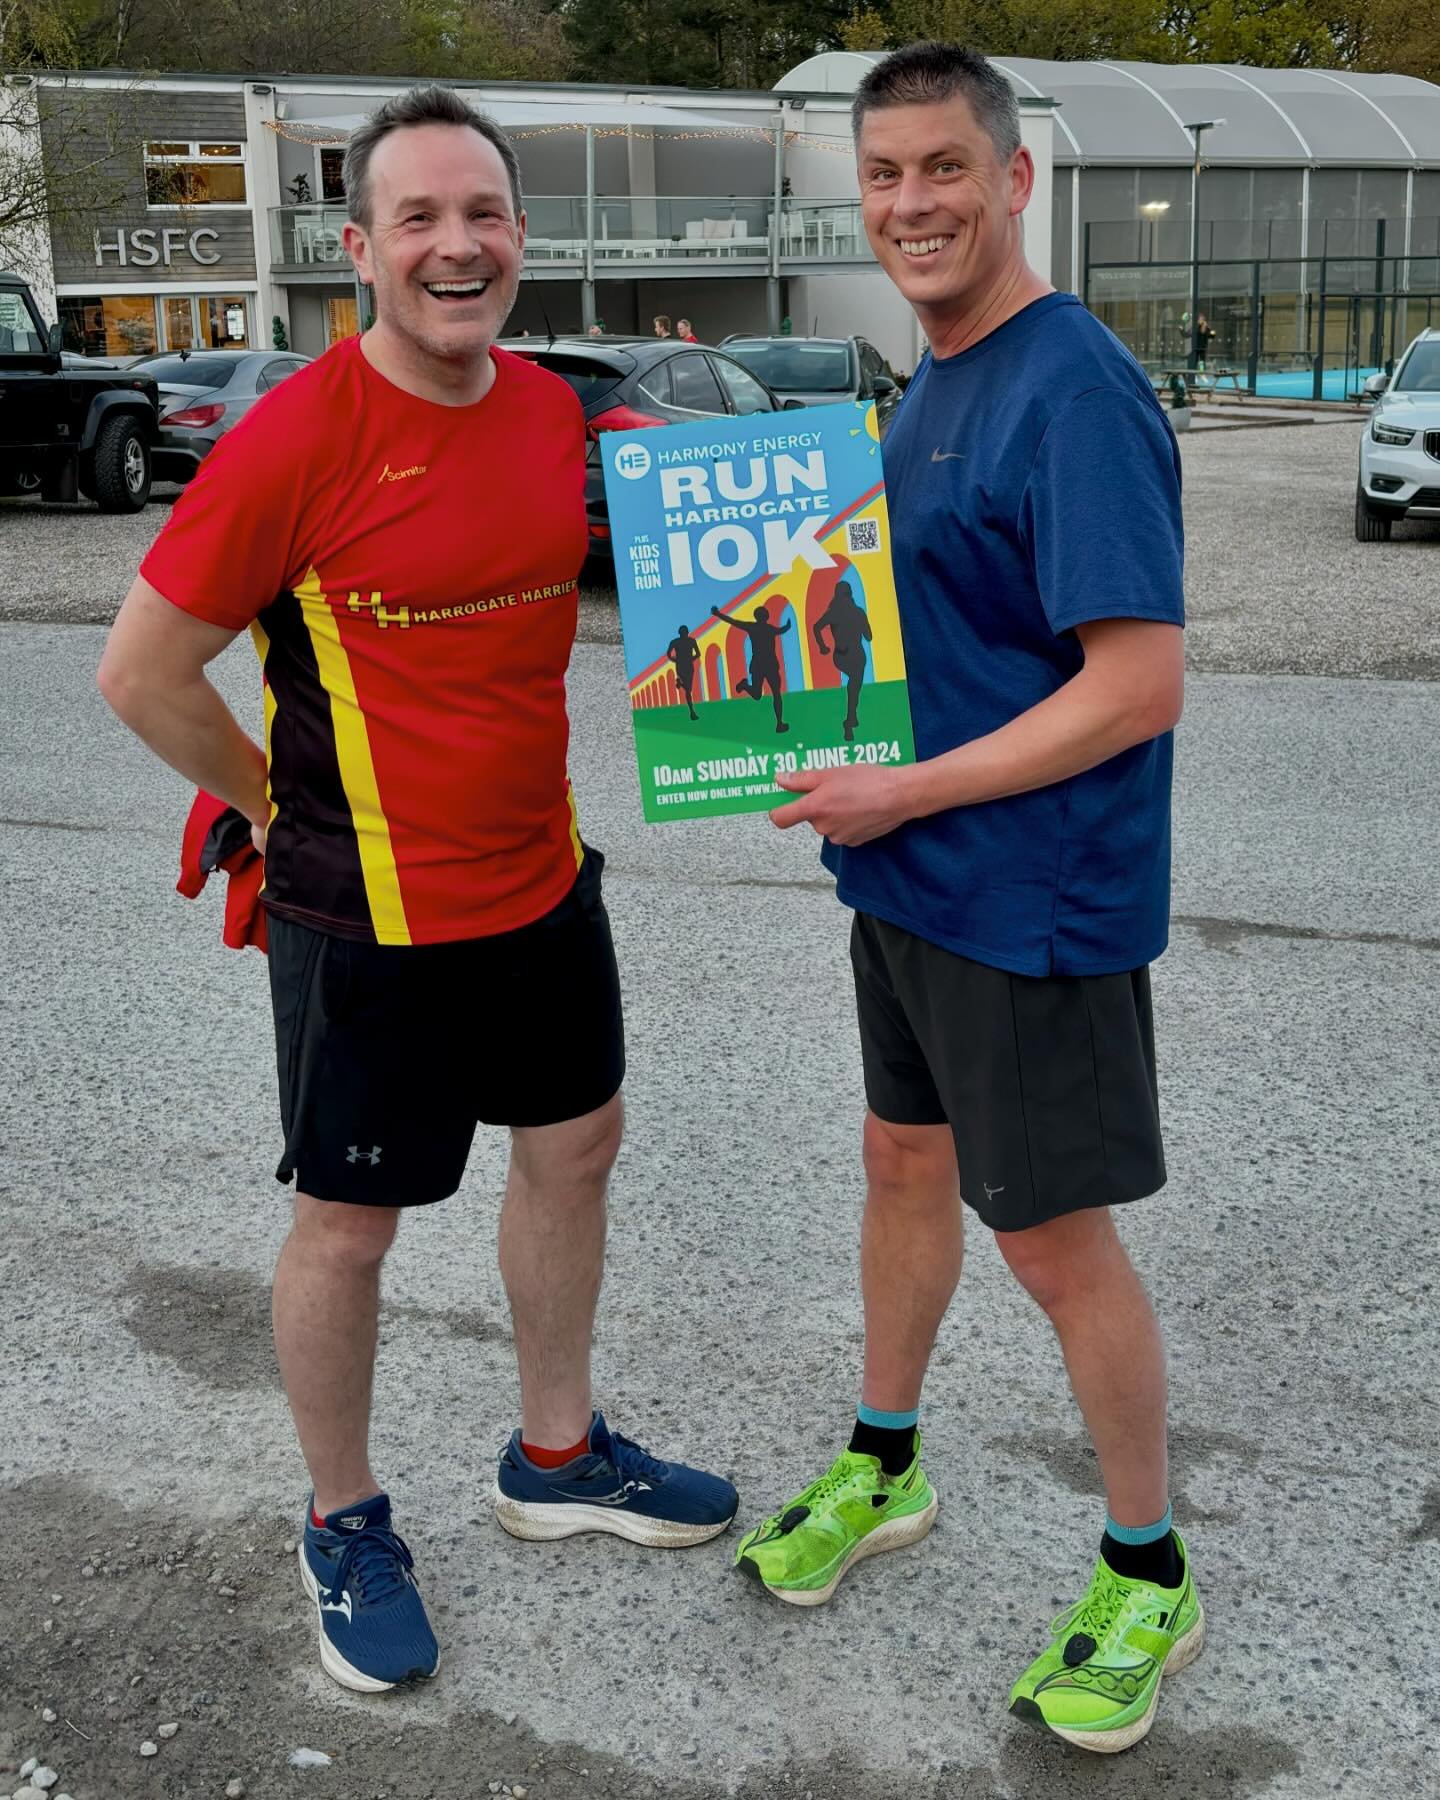 Ben the Chair and Nathan the Membership Secretary proudly showing off the #runharrogate10k boards for this year. Watch out for them on your 🏃🏻&zwj;♂️trots and 🚴&zwj;♀️ travels around Harrogate and beyond!